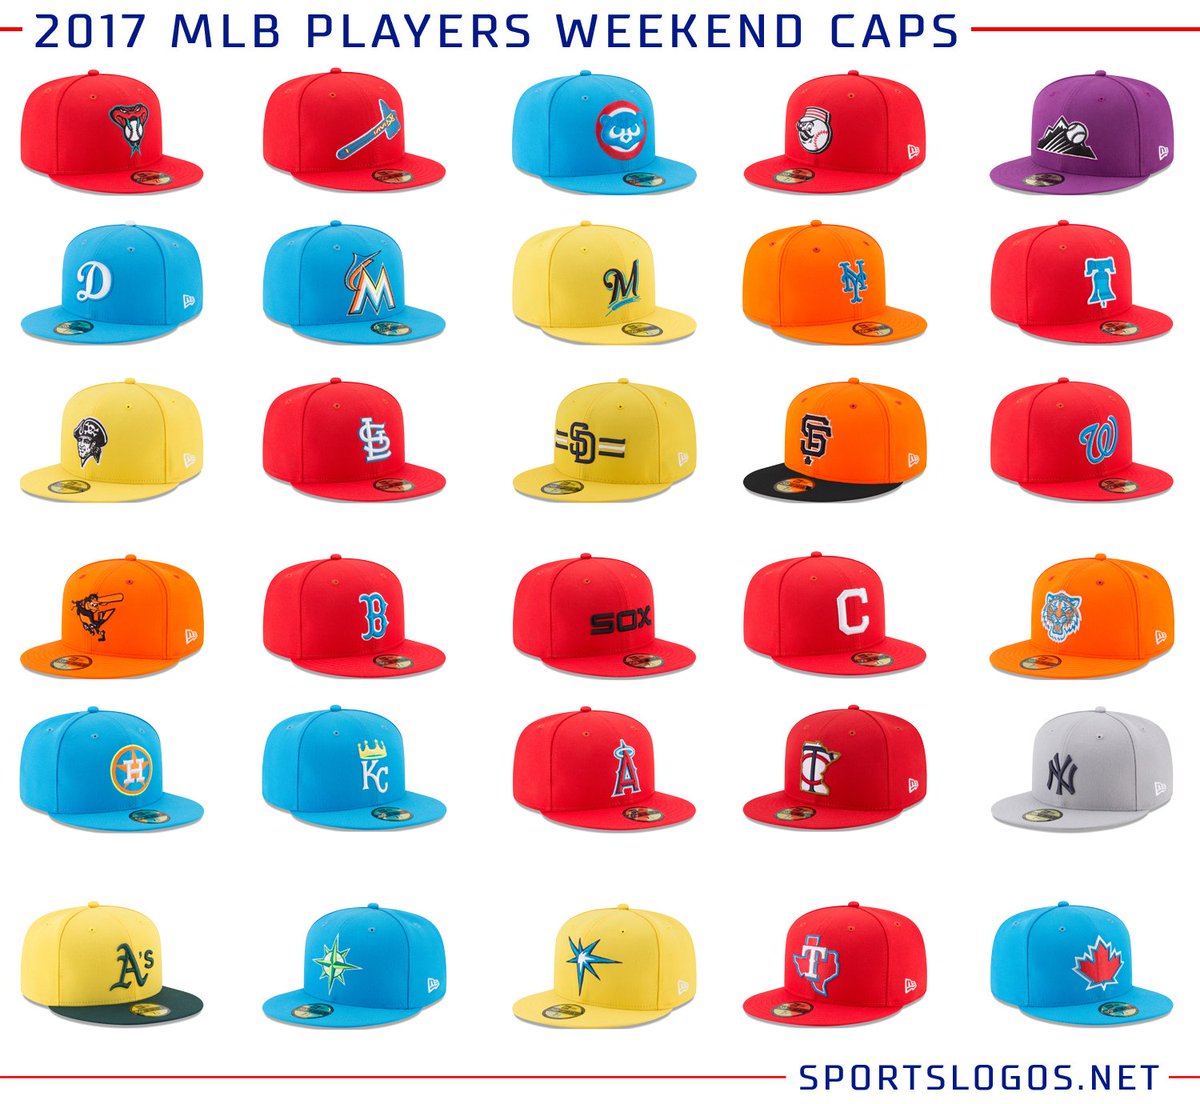 Paul Lukas on X: All 30 MLB Players Weekend caps, to be worn Aug. 25-27  (as compiled by @sportslogosnet).  / X